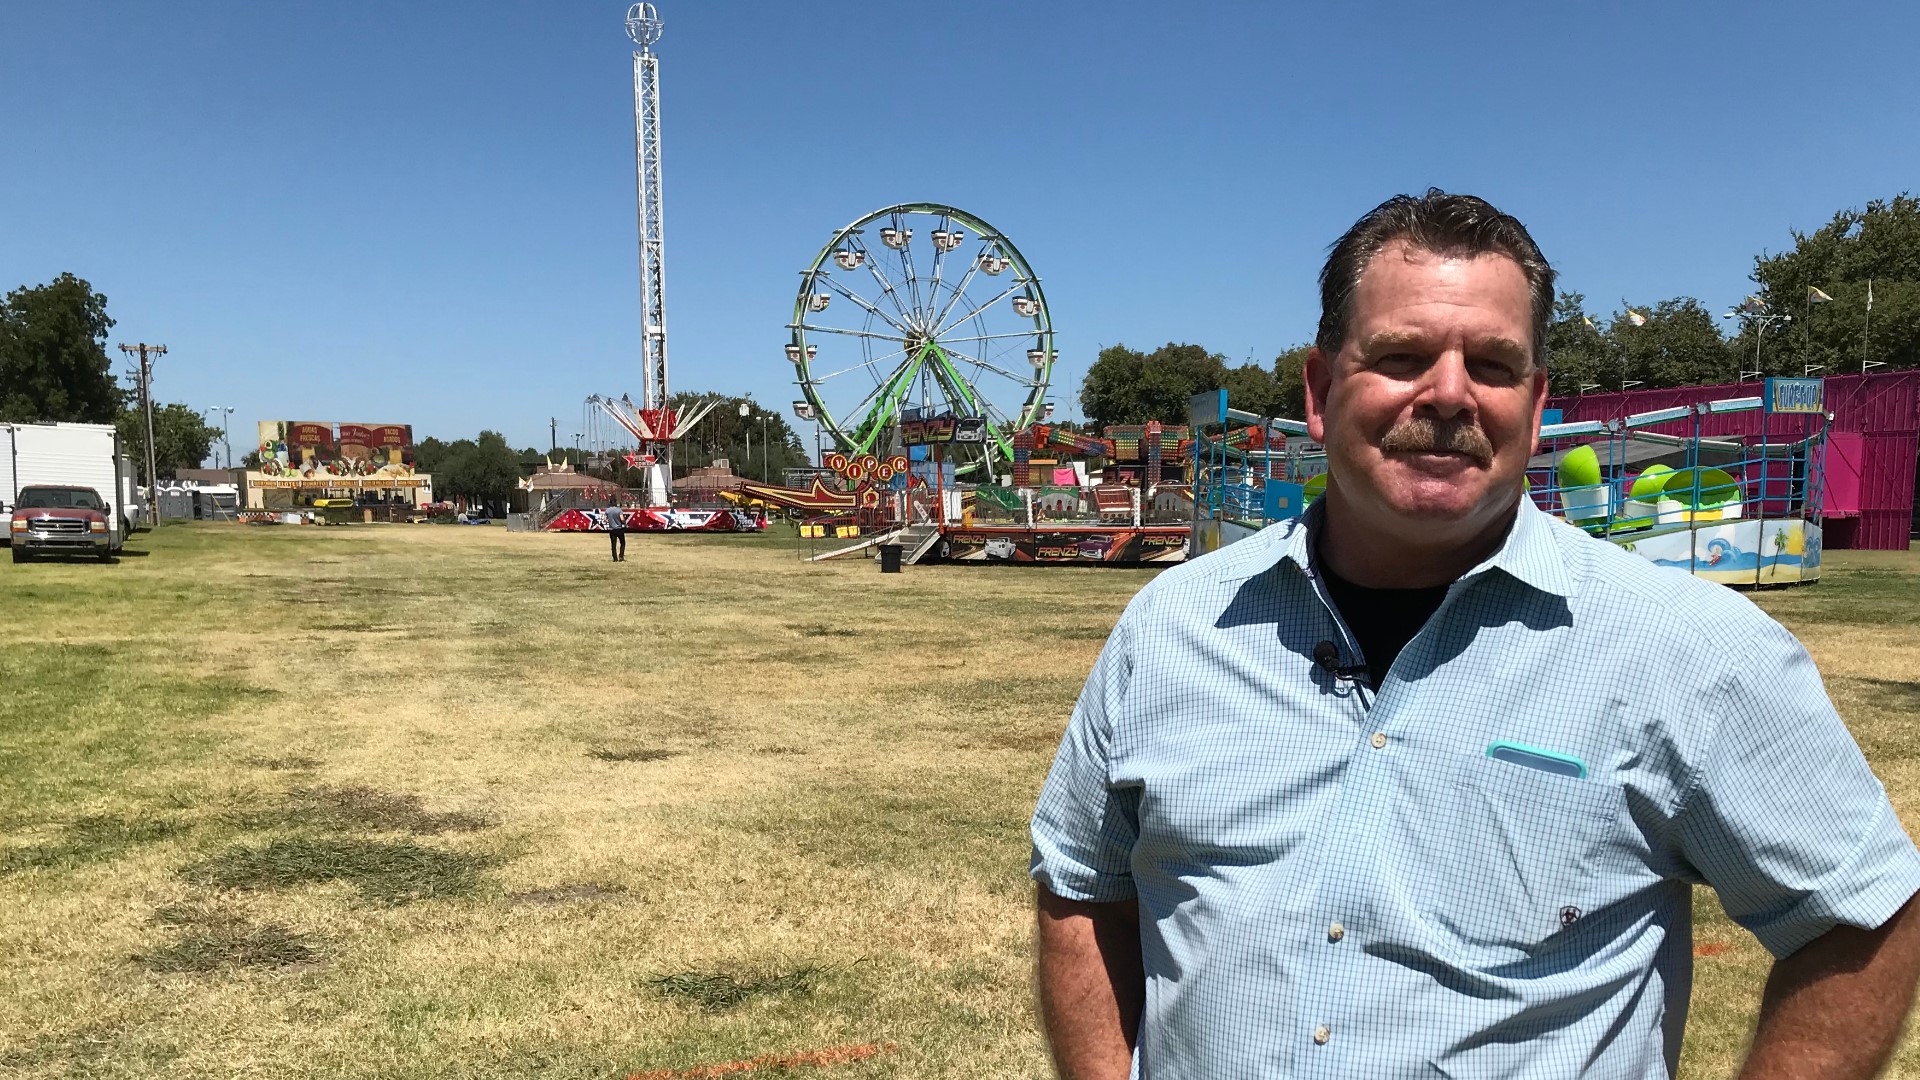 The Yolo County Fair is set to kick off Wednesday. But recent shootings across the country have heightened fears and fair organizers say they're planning ahead and taking a number of precautions to ensure the public's safety.